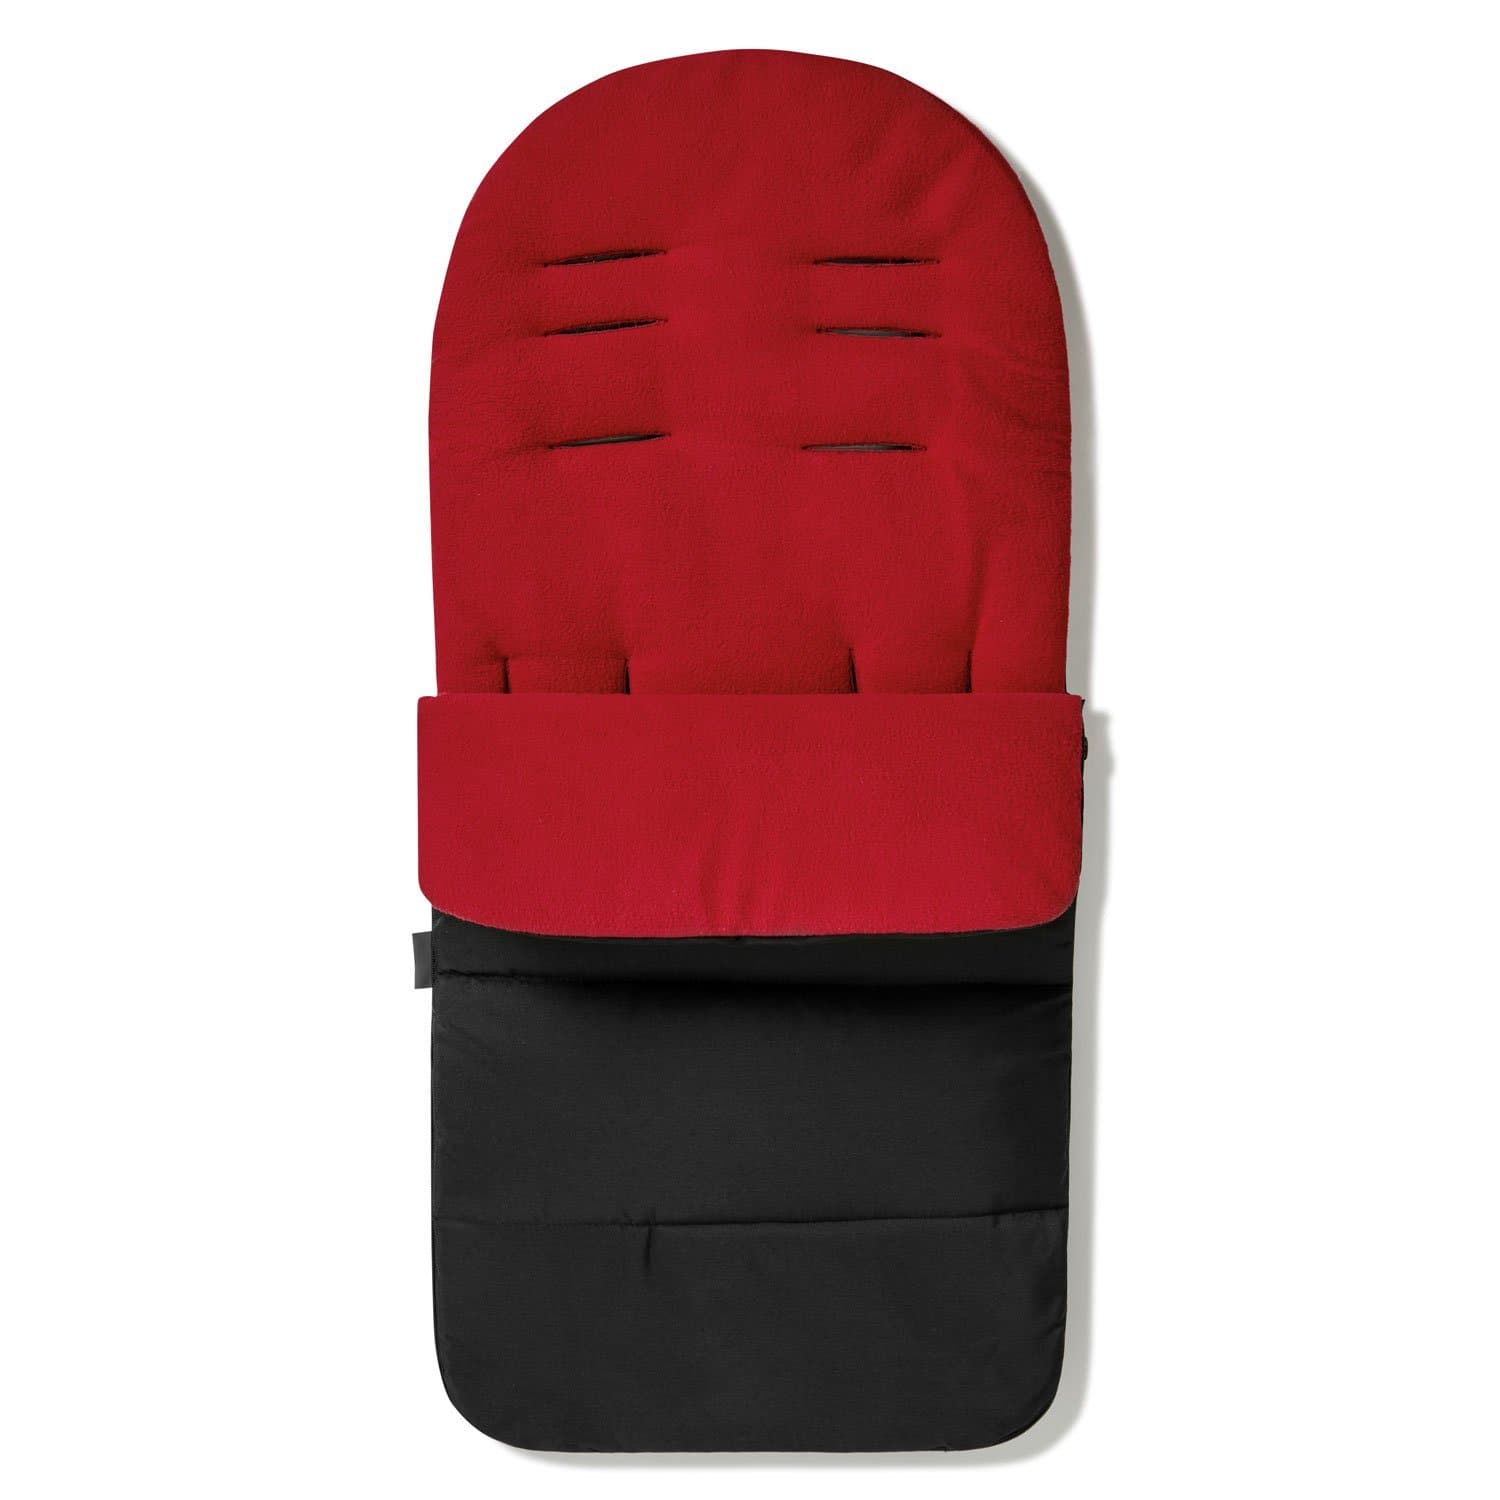 Premium Footmuff / Cosy Toes Compatible with Babyzen - Fire Red / Fits All Models | For Your Little One